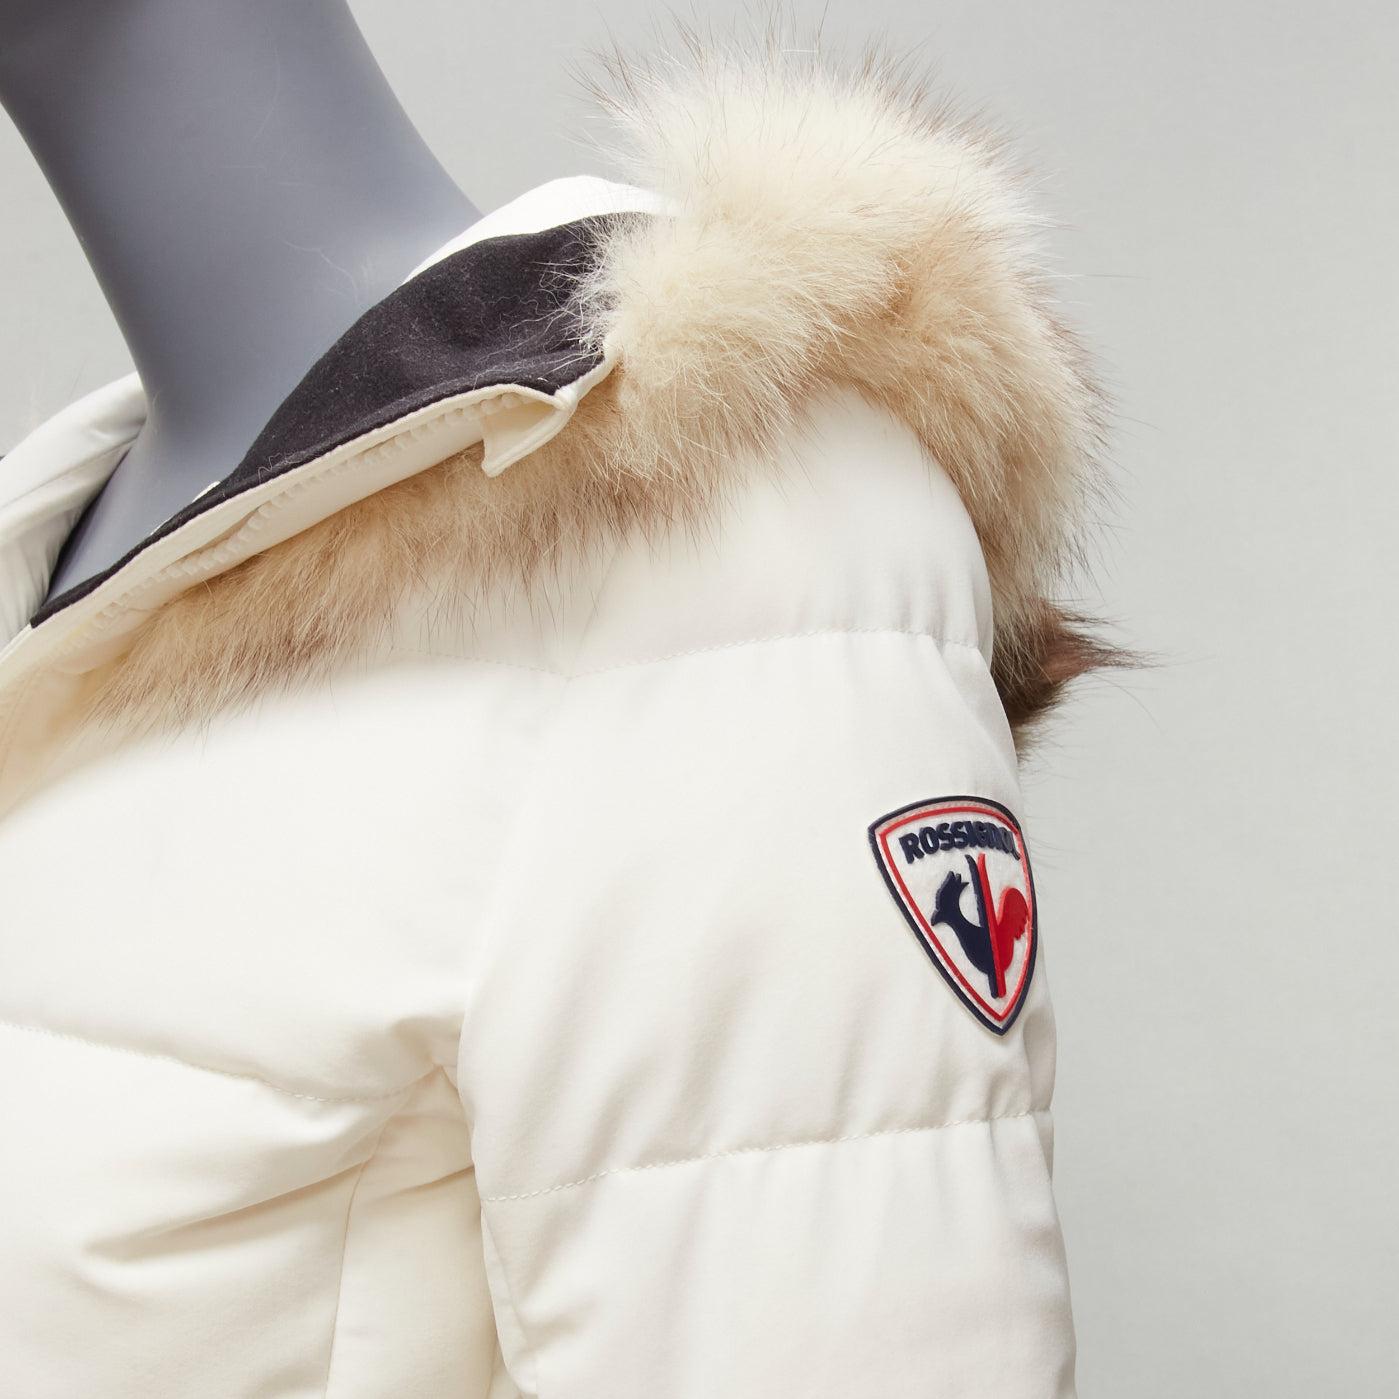 ROSSIGNOL ivory fur trim hood logo hooded down puffer jacket IT38 XS
Reference: SNKO/A00265
Brand: Rossignol
Material: Polyamide, Fur
Color: Cream
Pattern: Solid
Closure: Zip
Lining: Blue Fabric
Extra Details: Logo patch at left arm.
Made in: